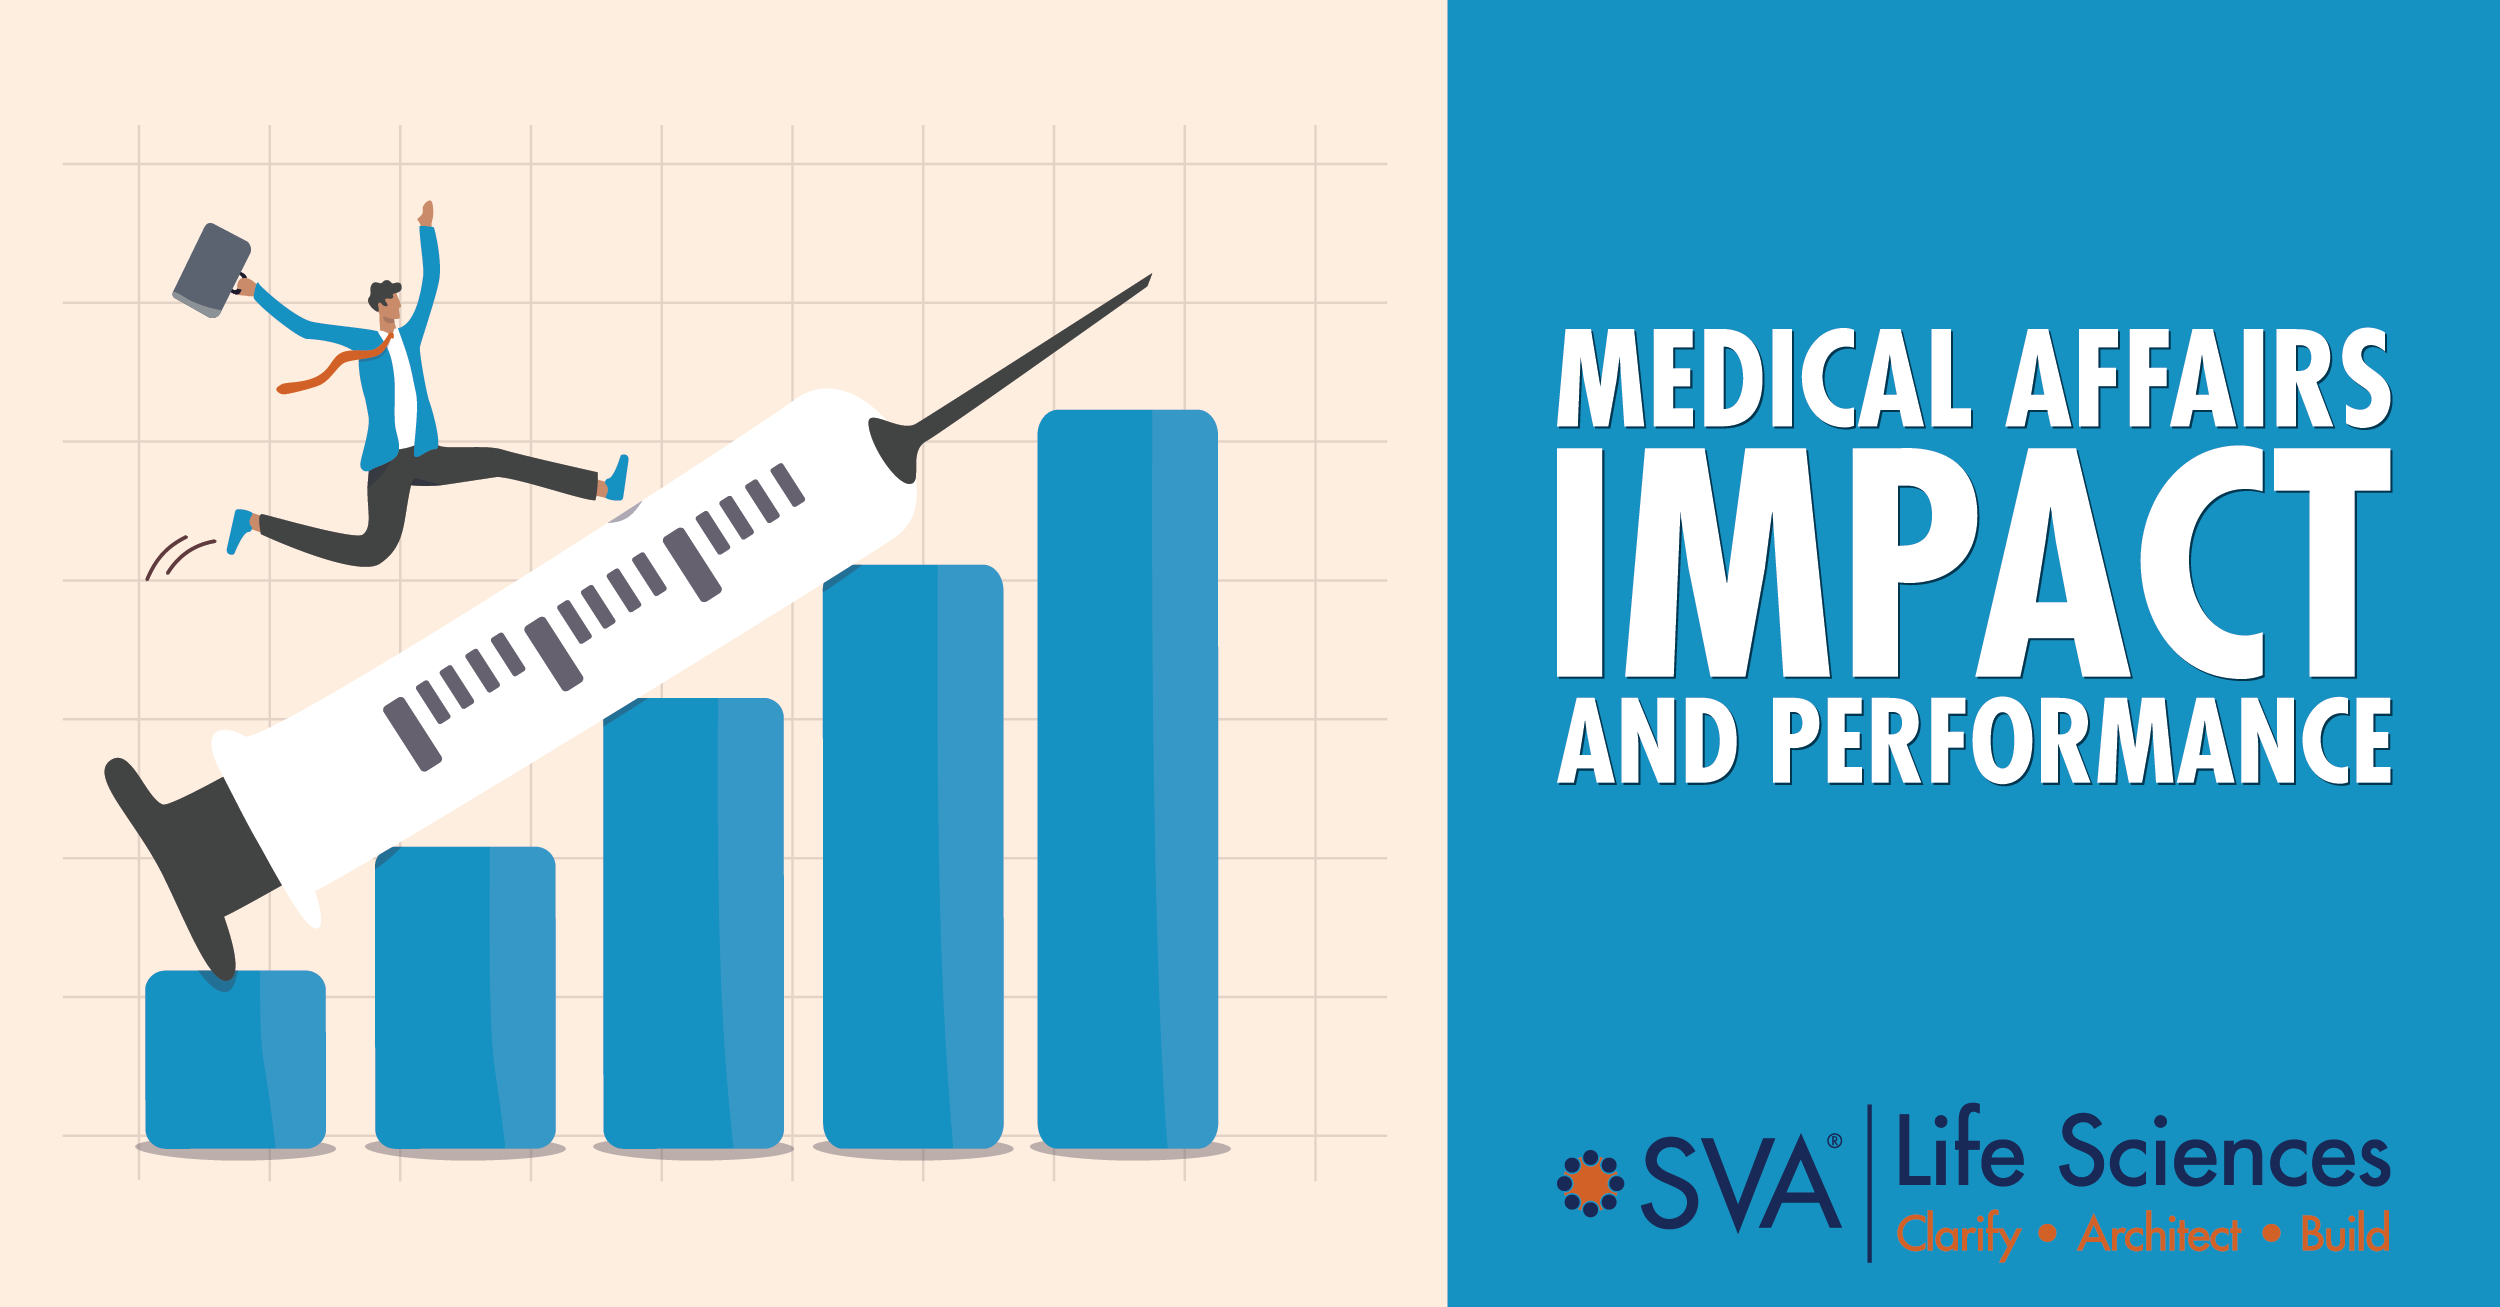 Medical Affairs Impact and Performance